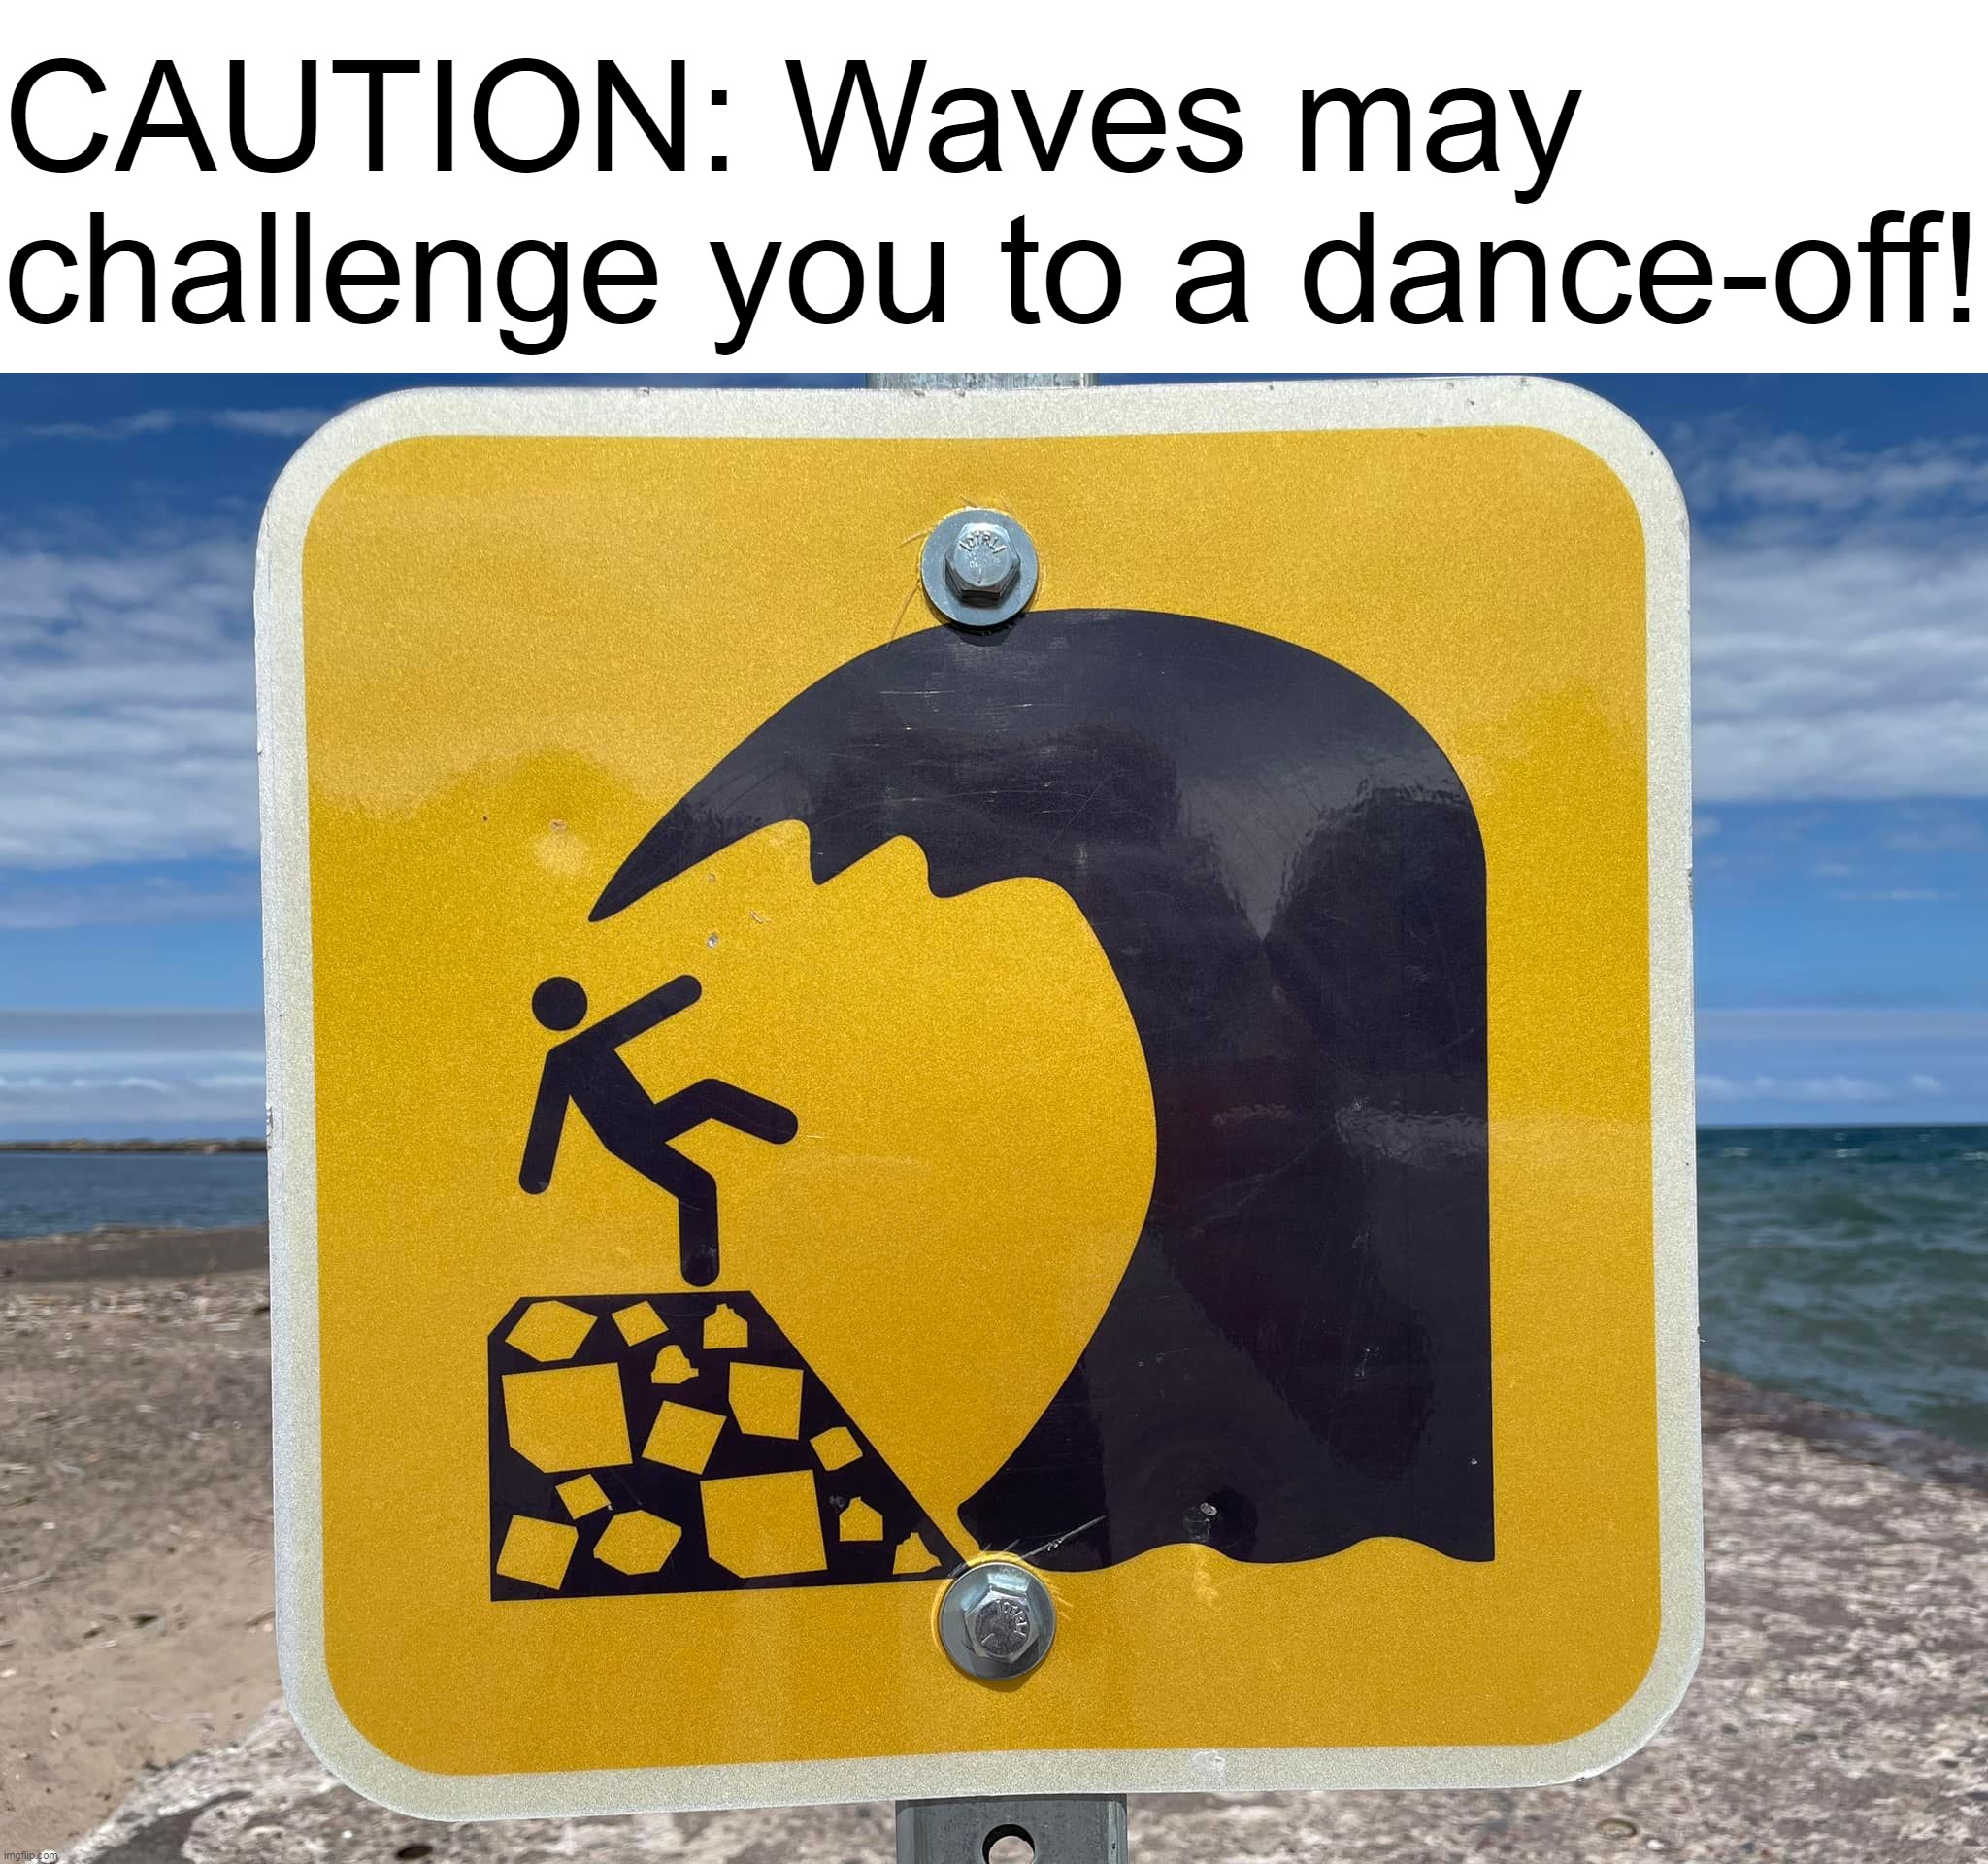 Time to Head Outta Here | CAUTION: Waves may challenge you to a dance-off! | image tagged in meme,memes,humor | made w/ Imgflip meme maker